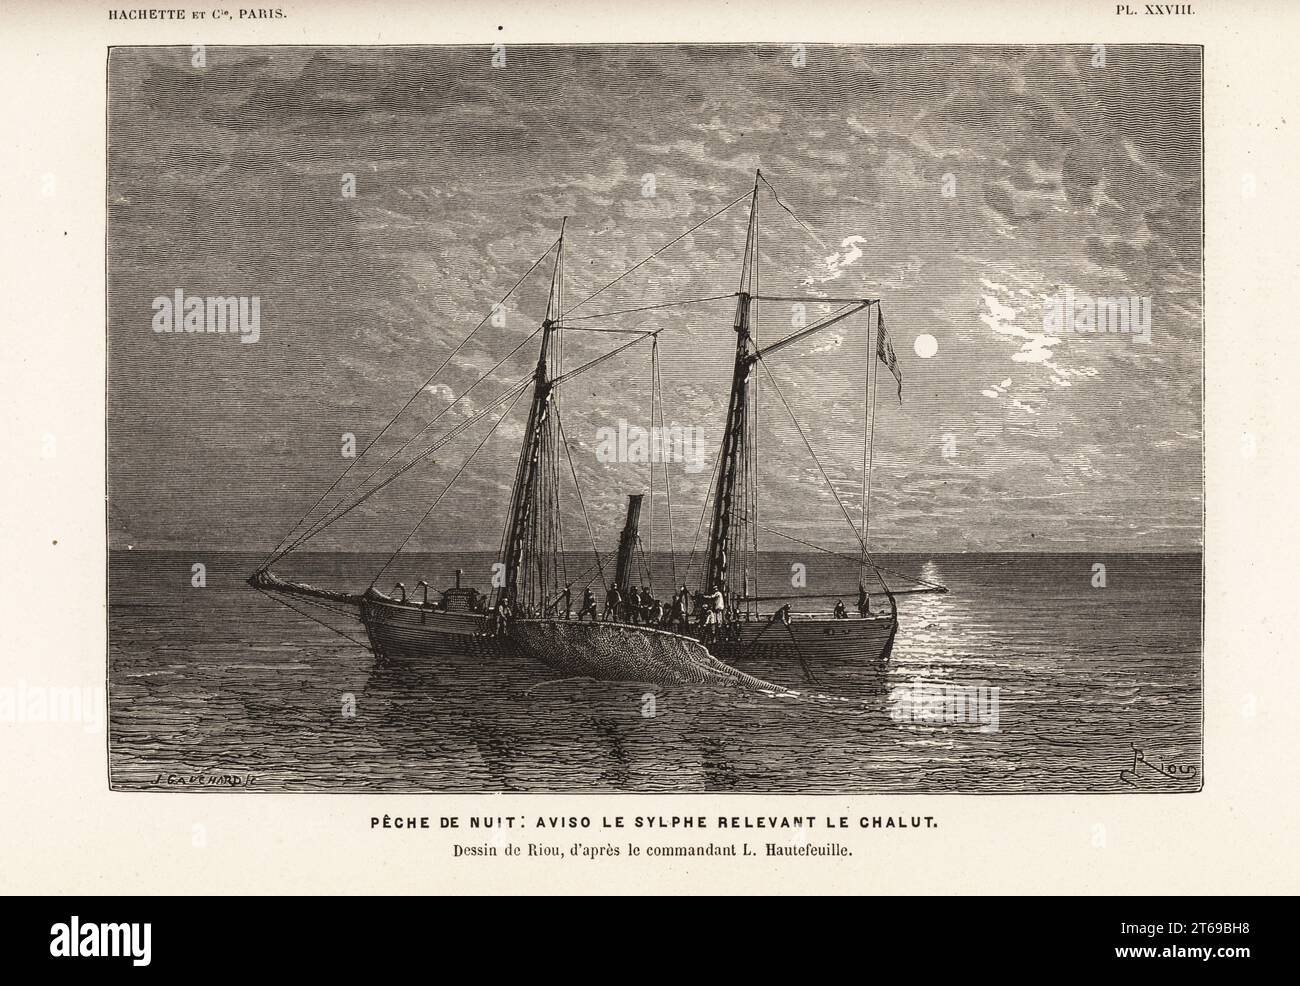 Night fishing. A steam-powered fishing boat Le Sylphe raising the trawl net by moonlight. Peche de nuit: Aviso le Sylphe relevant le chalut. Drawn by Edouard Riou after a photograph by L. Hautefeuille. Woodcut by J. Gavehard from Alfred Fredols Le Monde de la Mer, the World of the Sea, edited by Olivier Fredol, Librairie Hachette et. Cie., Paris, 1881. Alfred Fredol was the pseudonym of French zoologist and botanist Alfred Moquin-Tandon, 1804-1863. Stock Photo